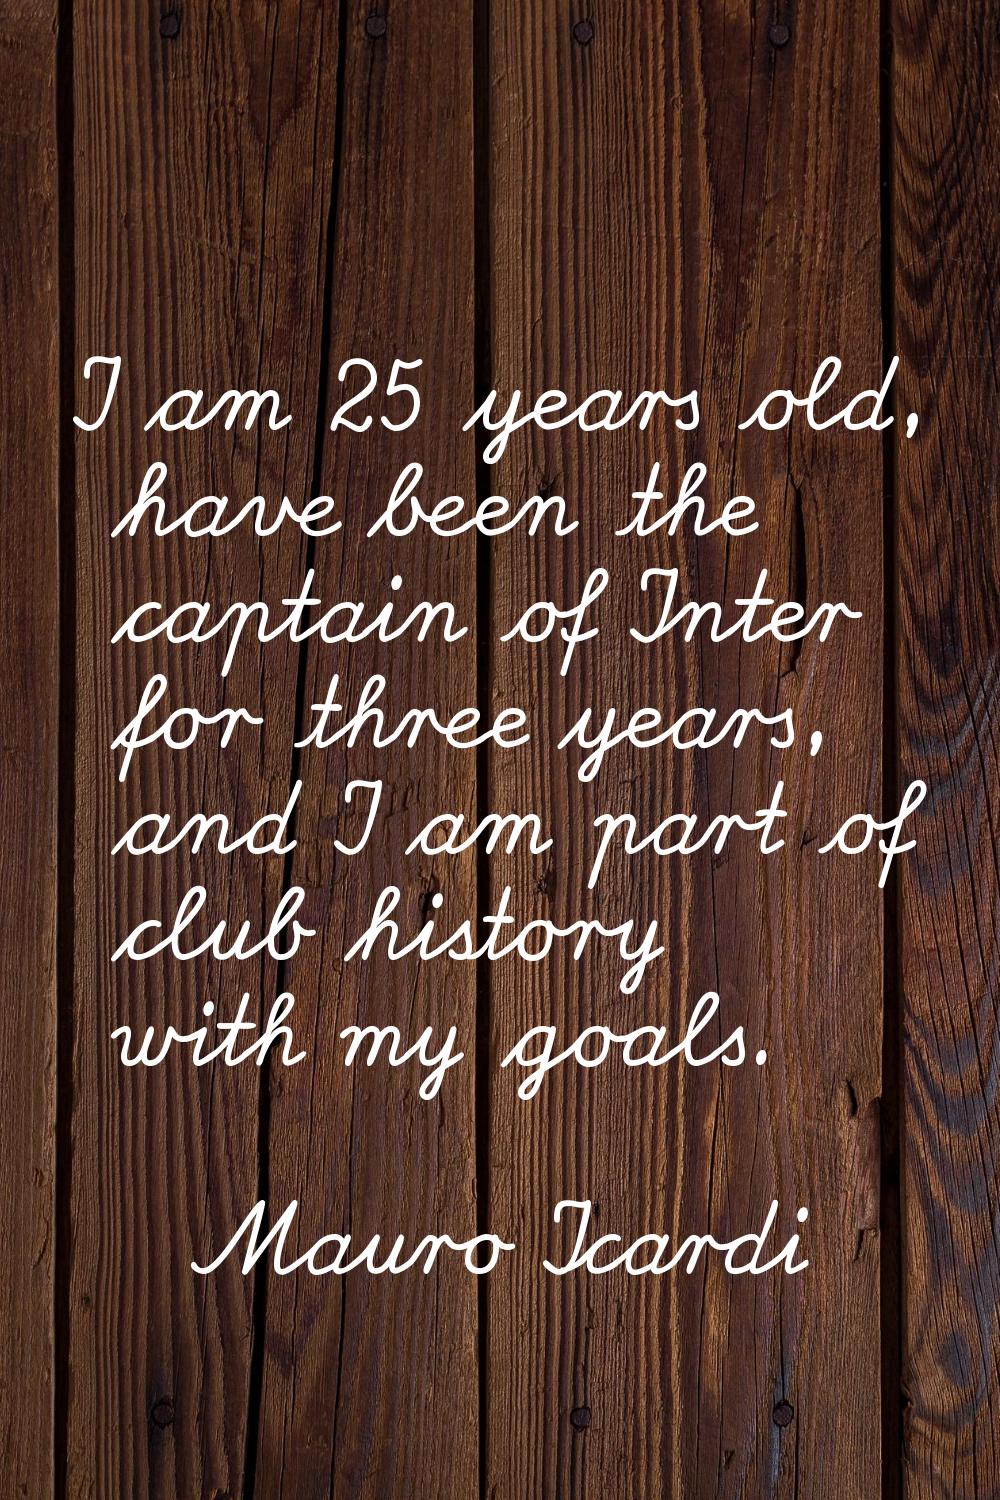 I am 25 years old, have been the captain of Inter for three years, and I am part of club history wi